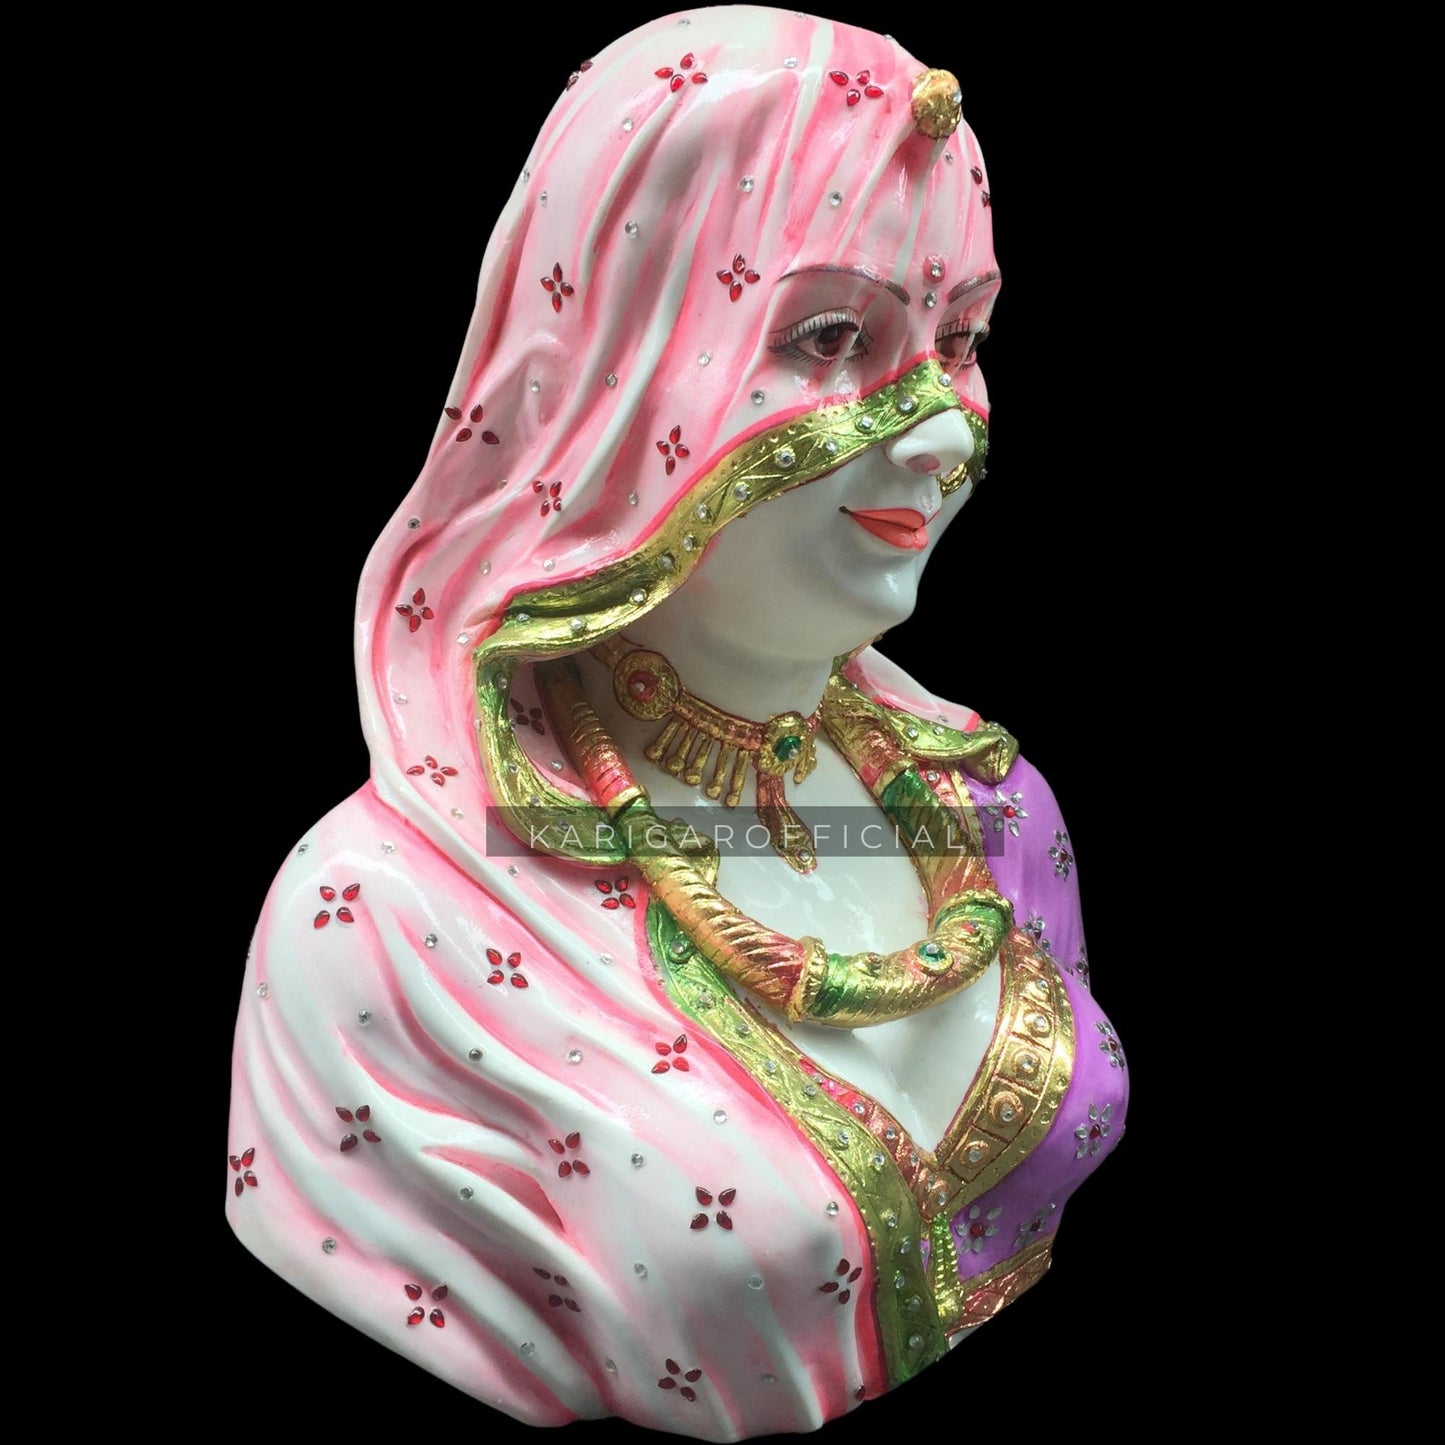 Bani Thani Bust Statue Large 15 inches Murti The Indian Mona Lisa Bust Marble Sculpture Traditional Indian Women Figurine Bust Multicolor Jewelry Clothes Figurine Perfect for Home Office Decor Gifts